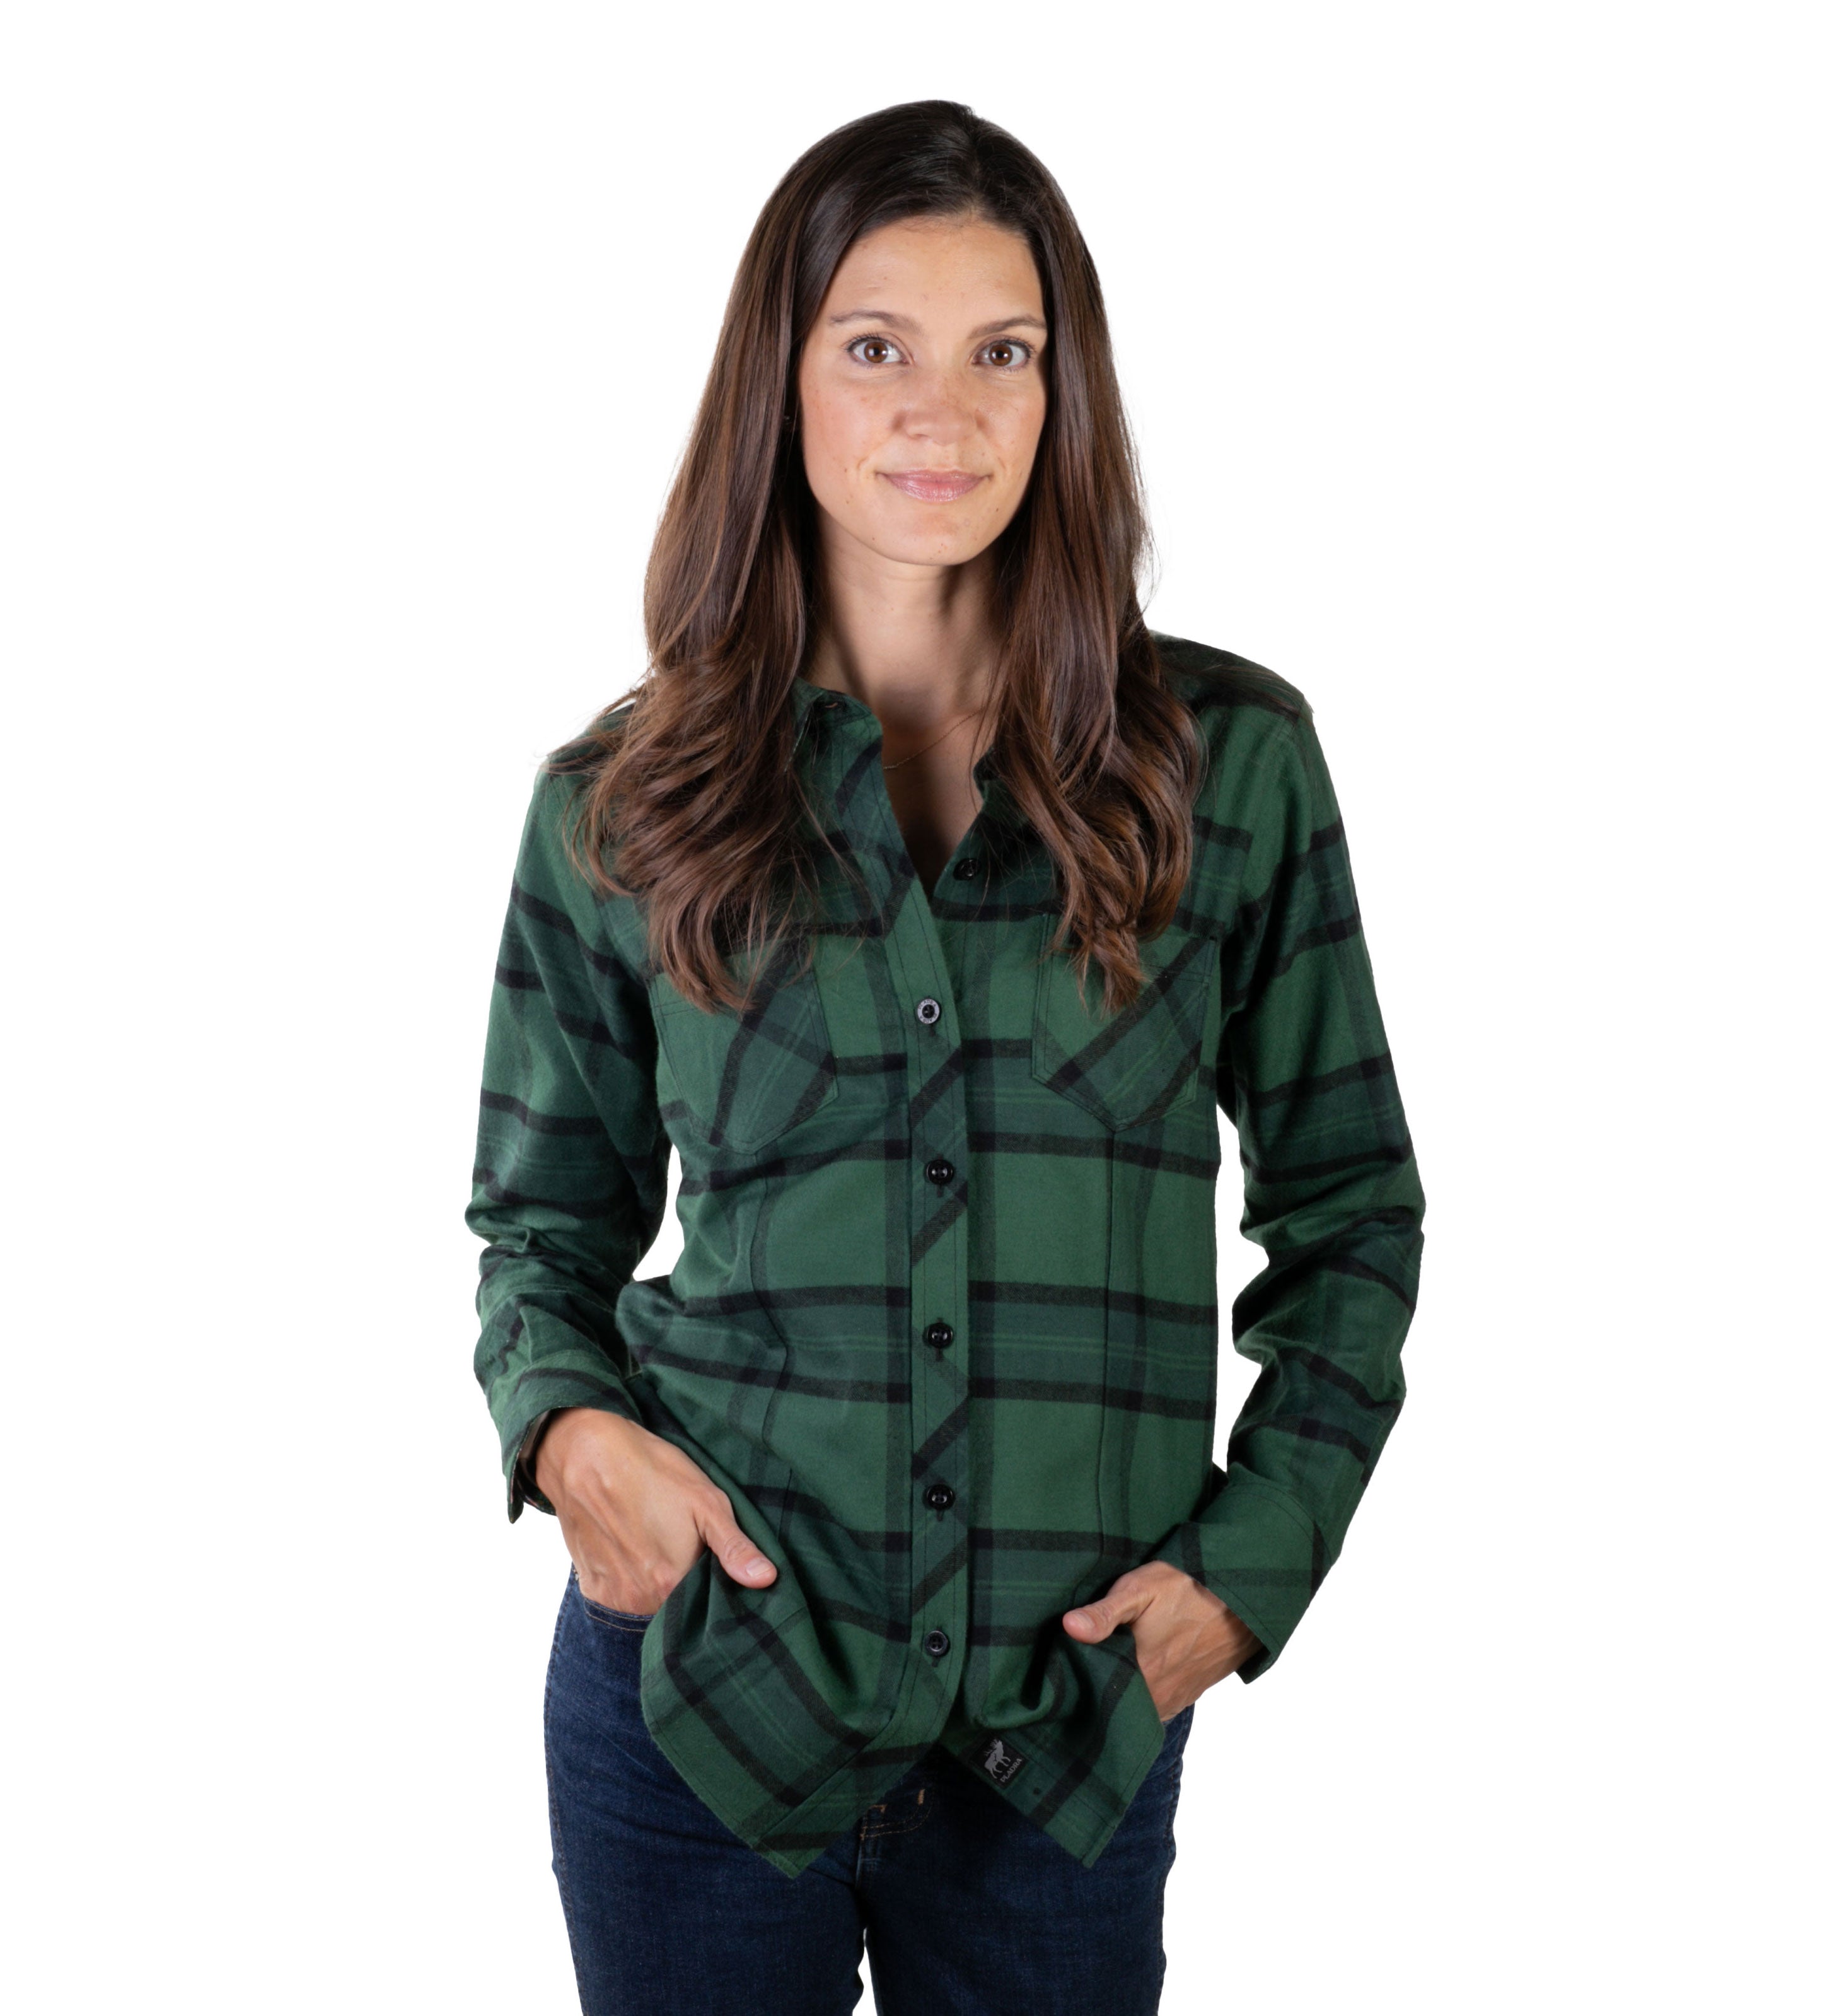 Pladra Women's Peregrine Every Day Flannel Shirt- Ever Green 1x